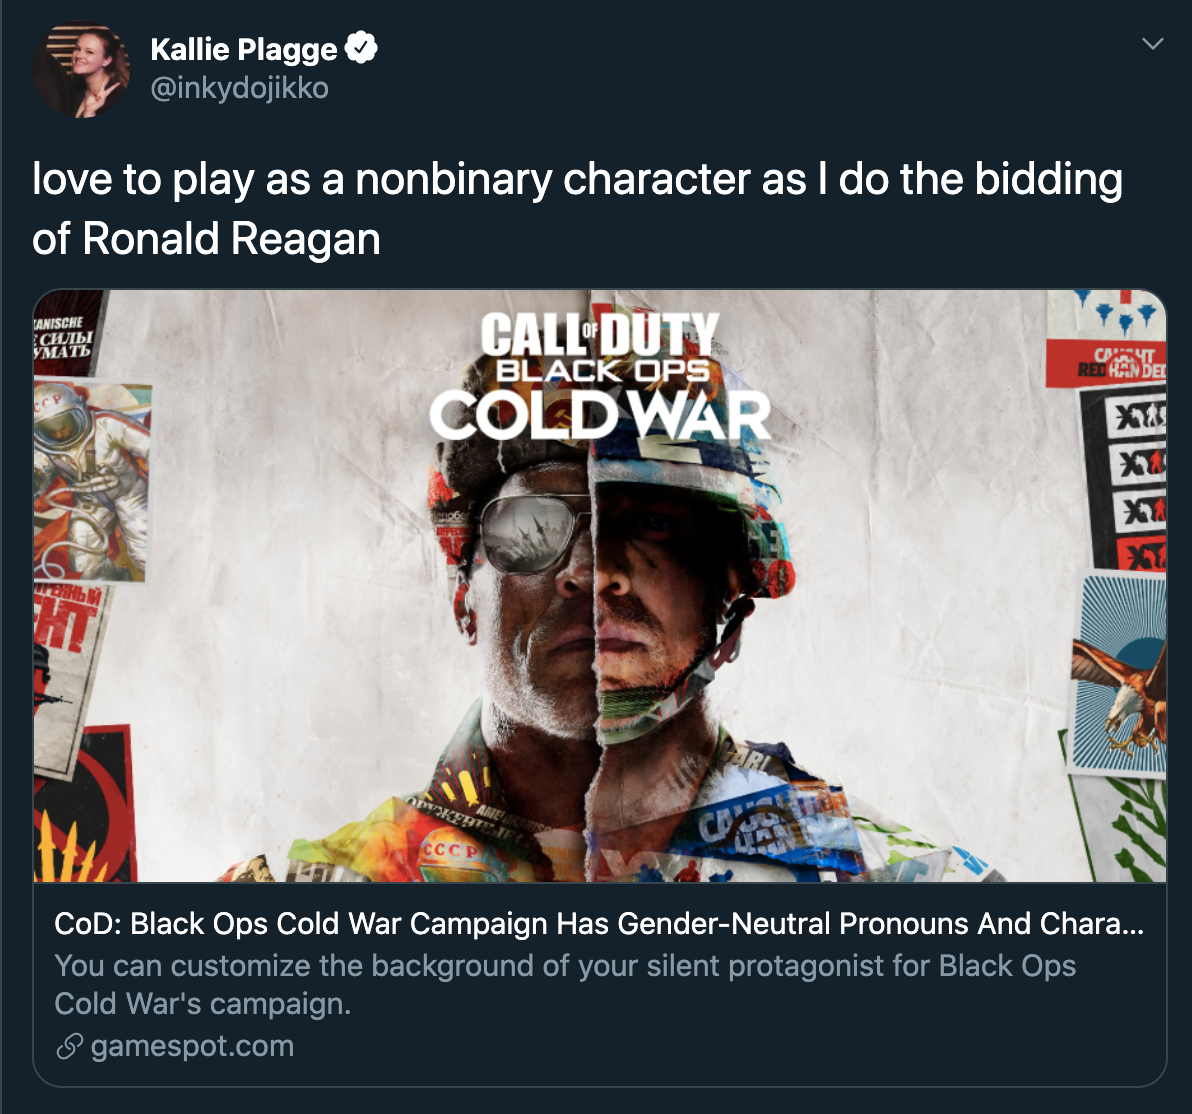 love to play as a nonbinary character as I do the bidding of Ronald Reagan Com Mate Ot Call Duty Black Ops Cold War X Xt Cod Black Ops Cold War Campaign Has GenderNeutral Pronouns